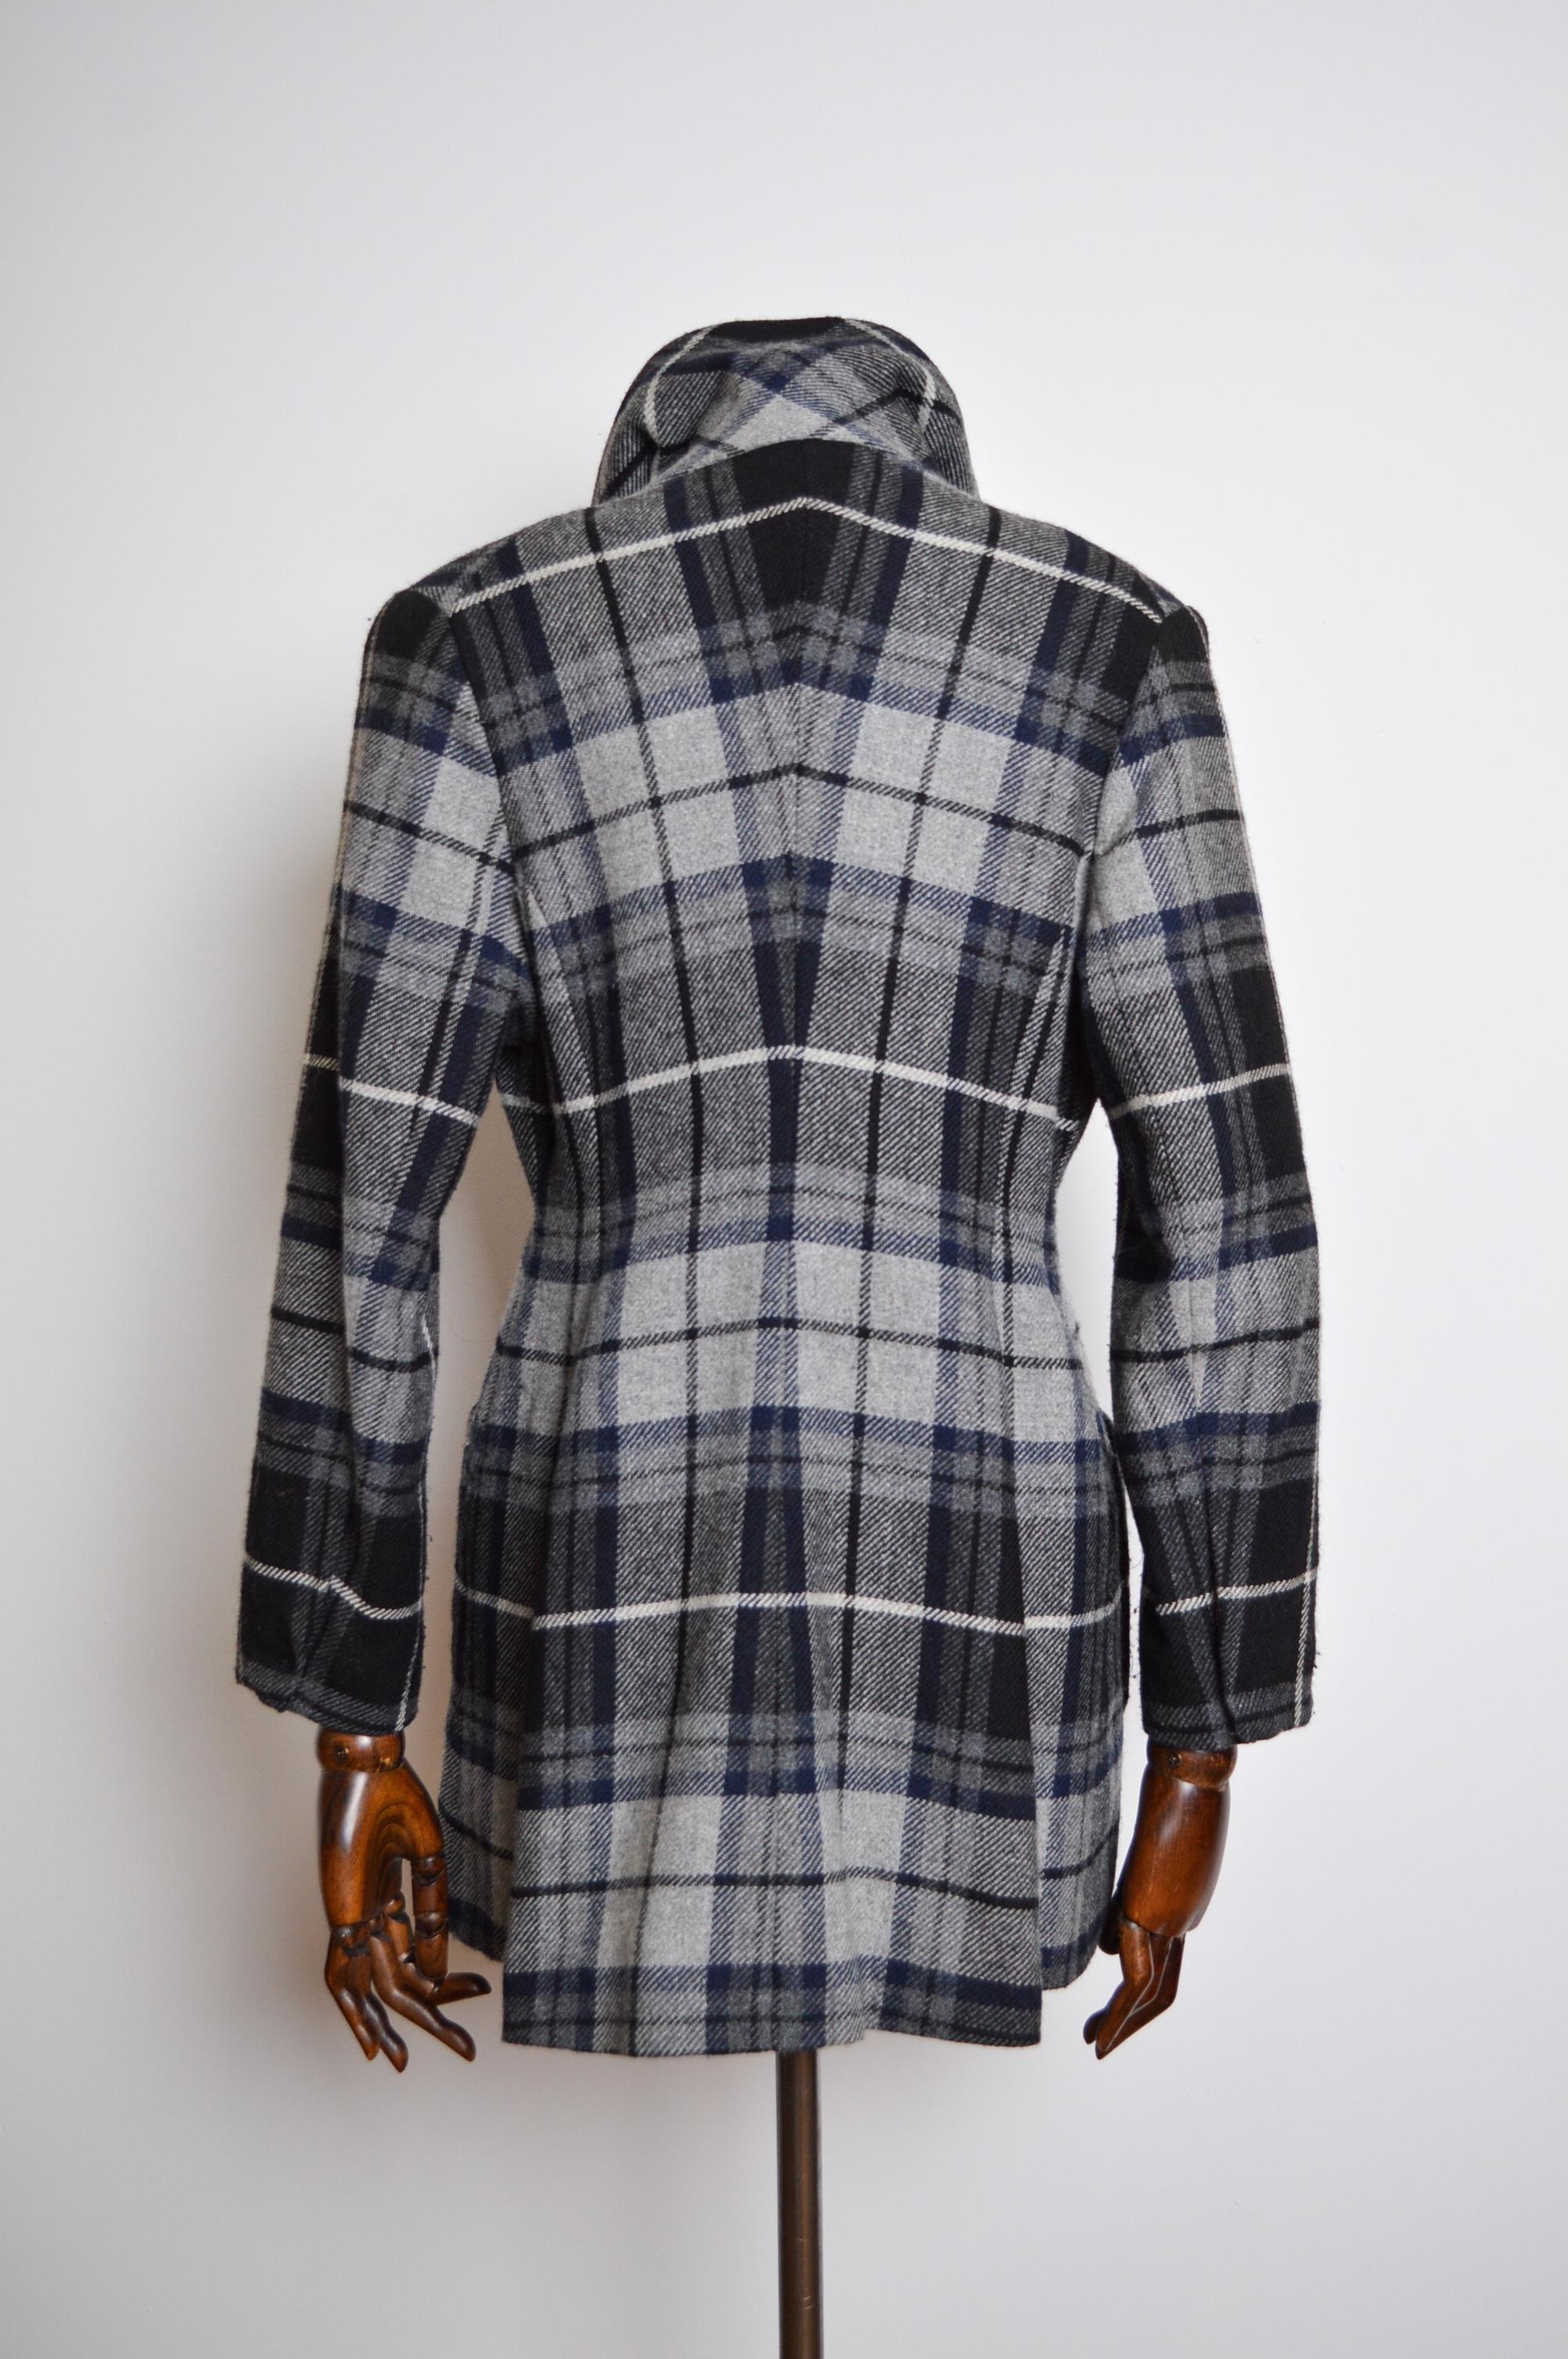 Rare Vivienne Westwood 3 Suisses AW 1995/ 1996 Collab Checked Tartan Wool Coat  For Sale 7